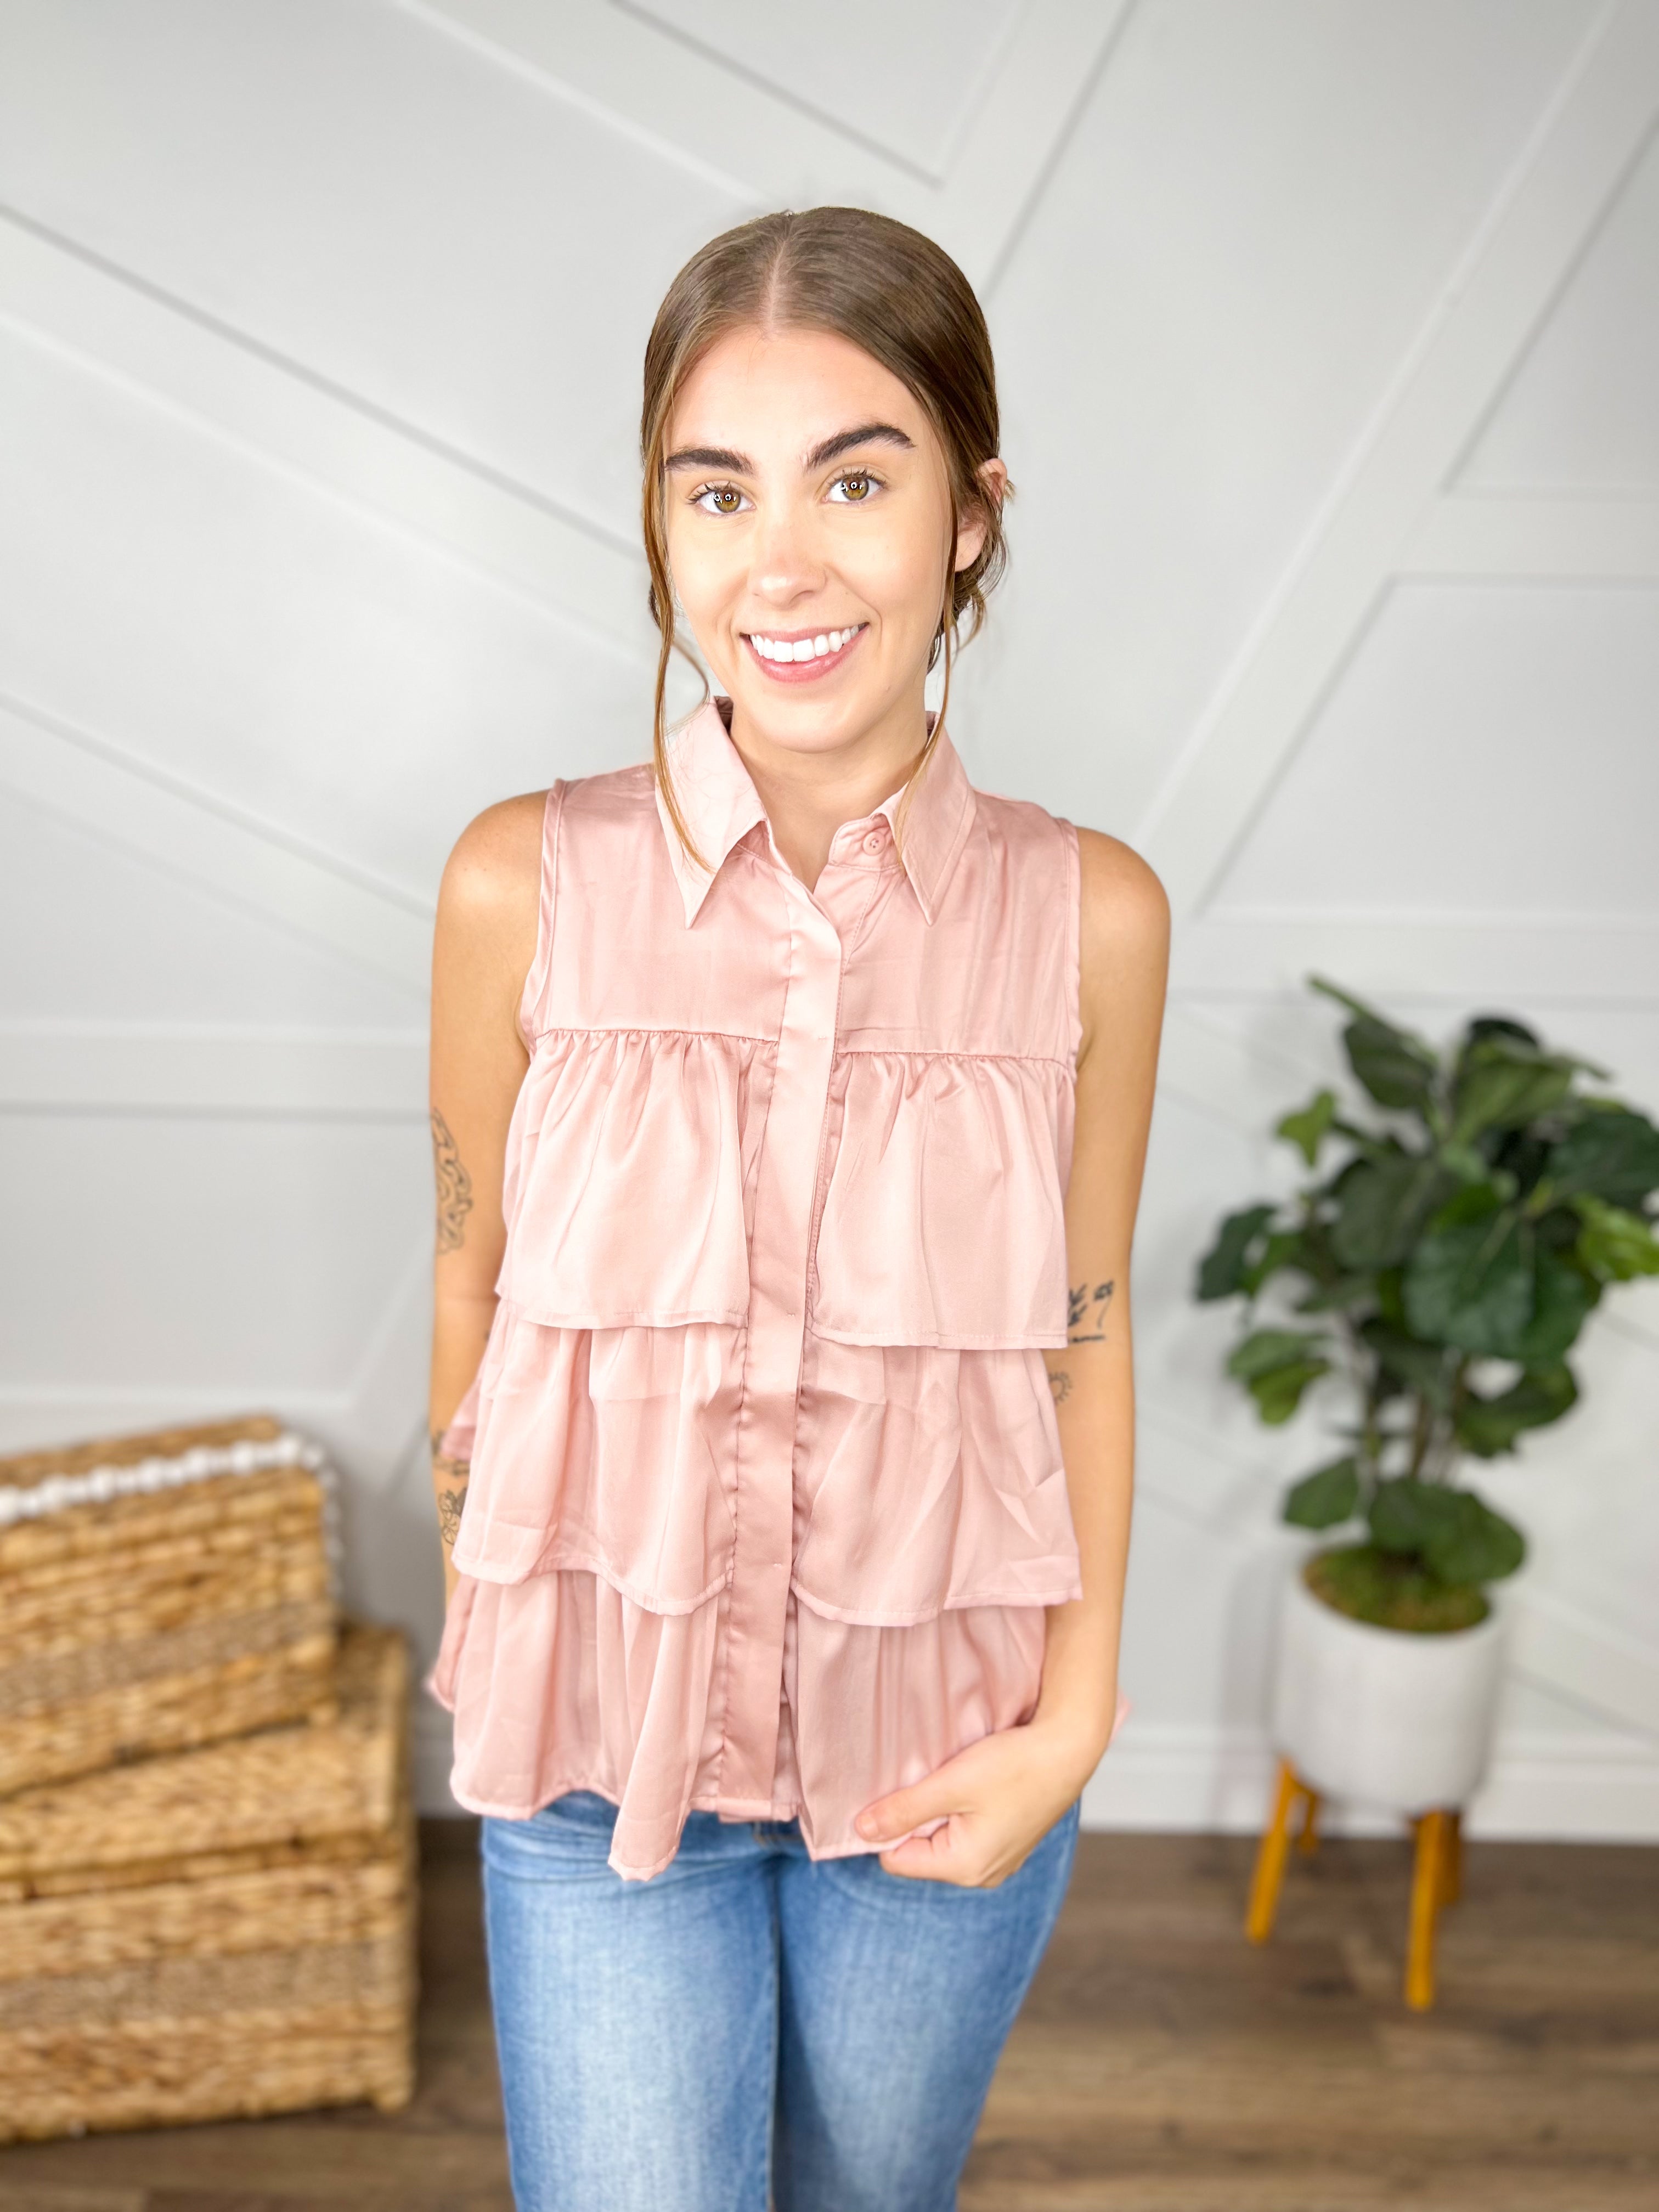 Andrea Ruffle Top-110 Short Sleeve Top-Southern Grace-Heathered Boho Boutique, Women's Fashion and Accessories in Palmetto, FL